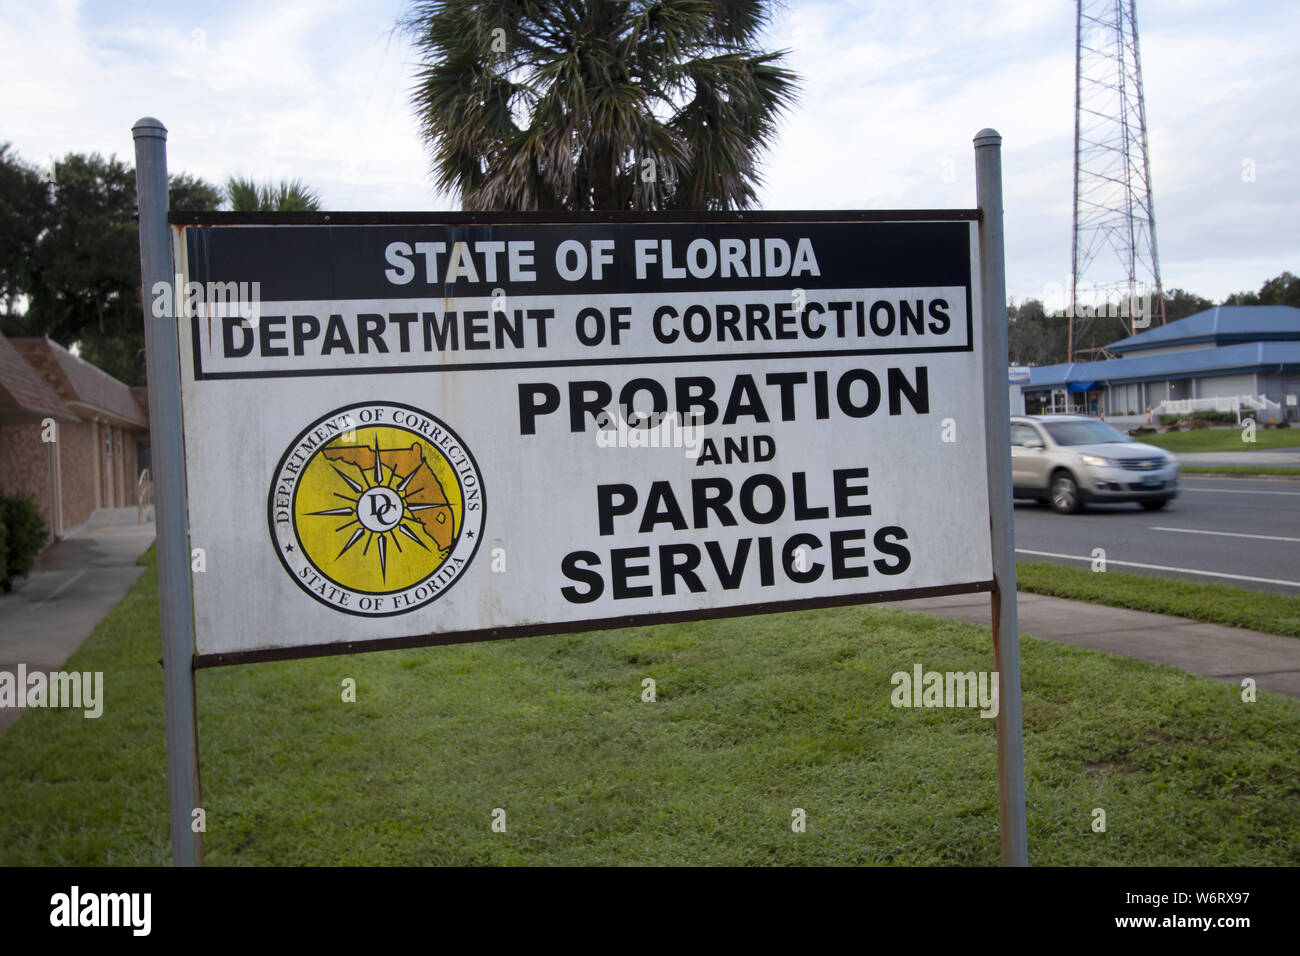 Probation and Parole Services sign for the State of Florida Department of Corrections Stock Photo